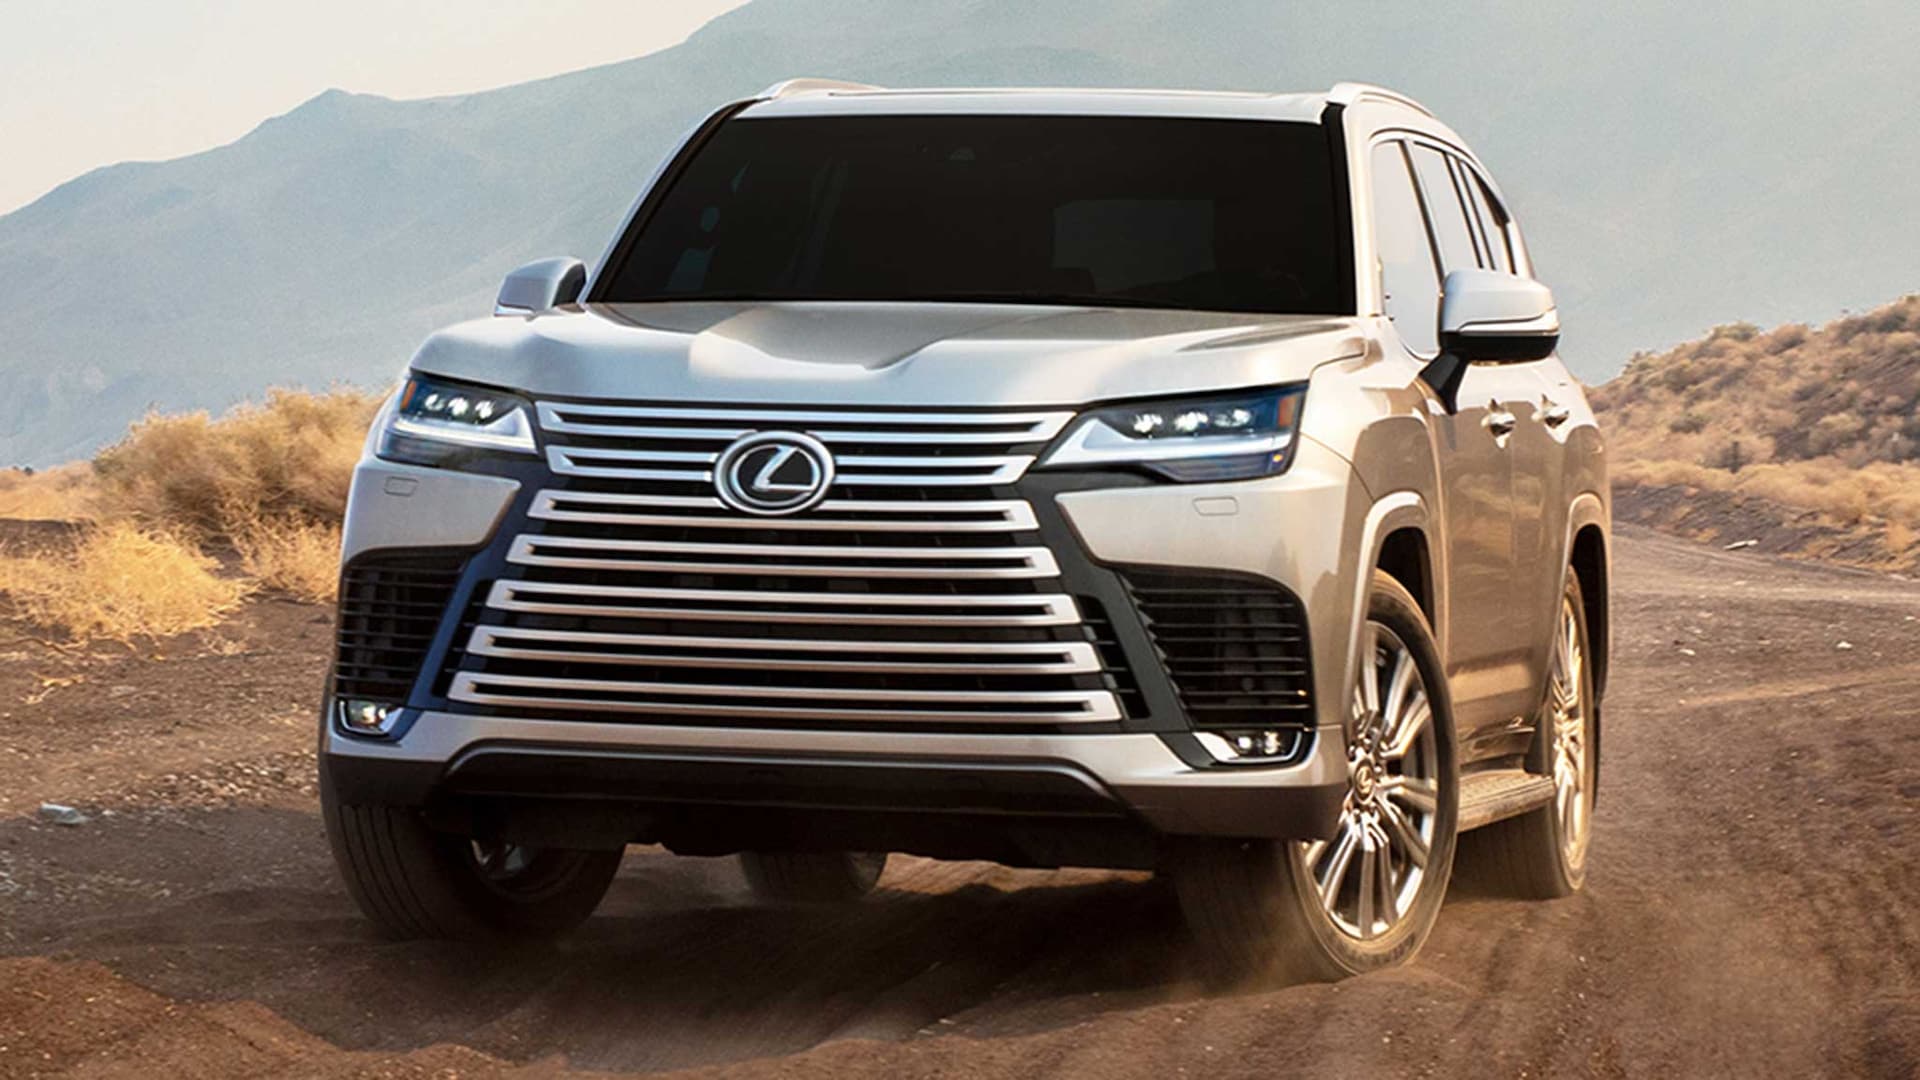 2022 Lexus LX600 First Look: The Land Cruiser Americans Can Buy